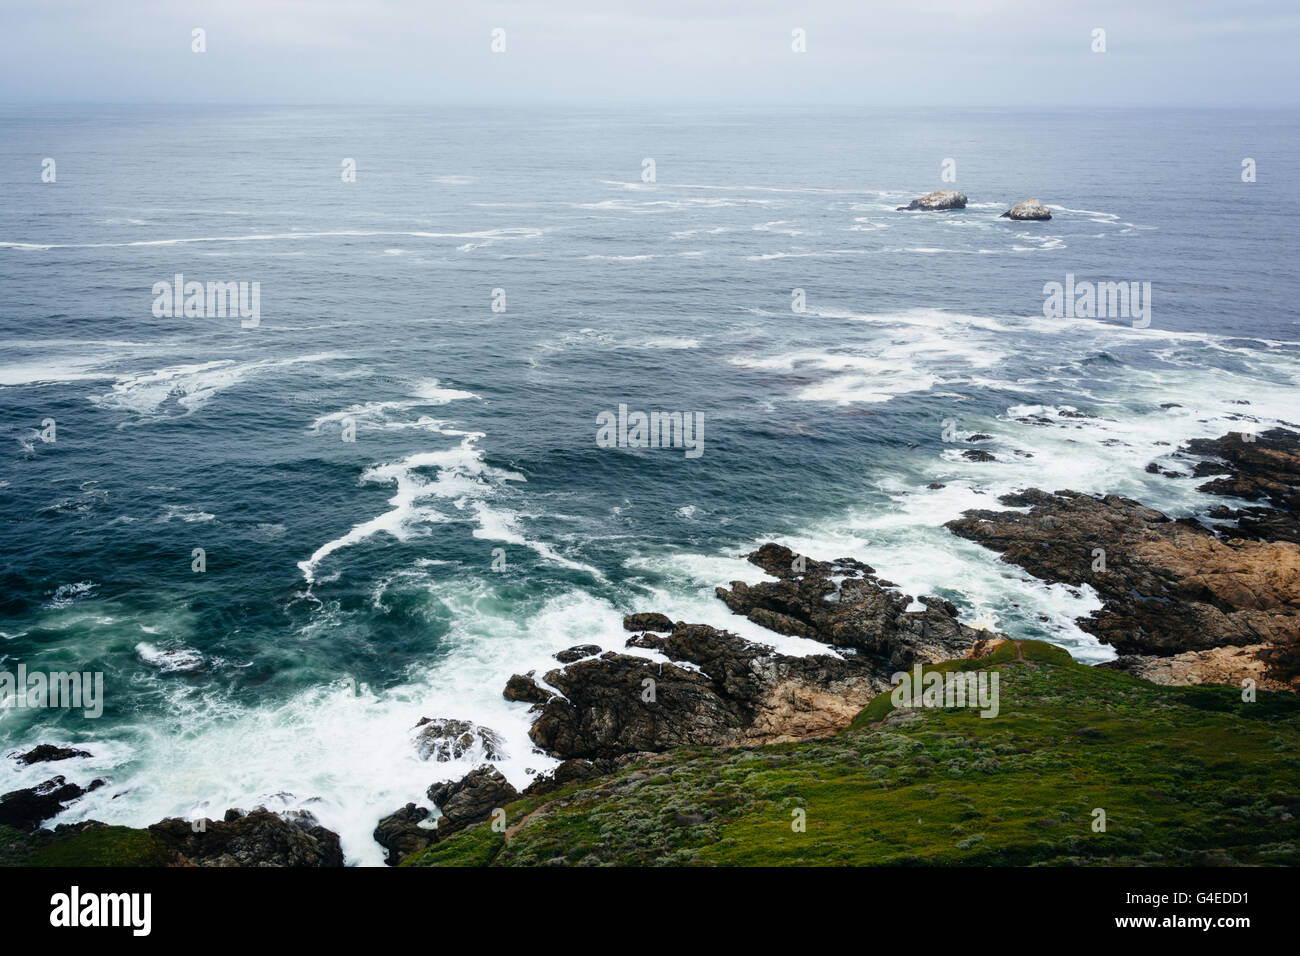 View of the rocky Pacific Coast from a bluff at Garrapata State Park, California. Stock Photo